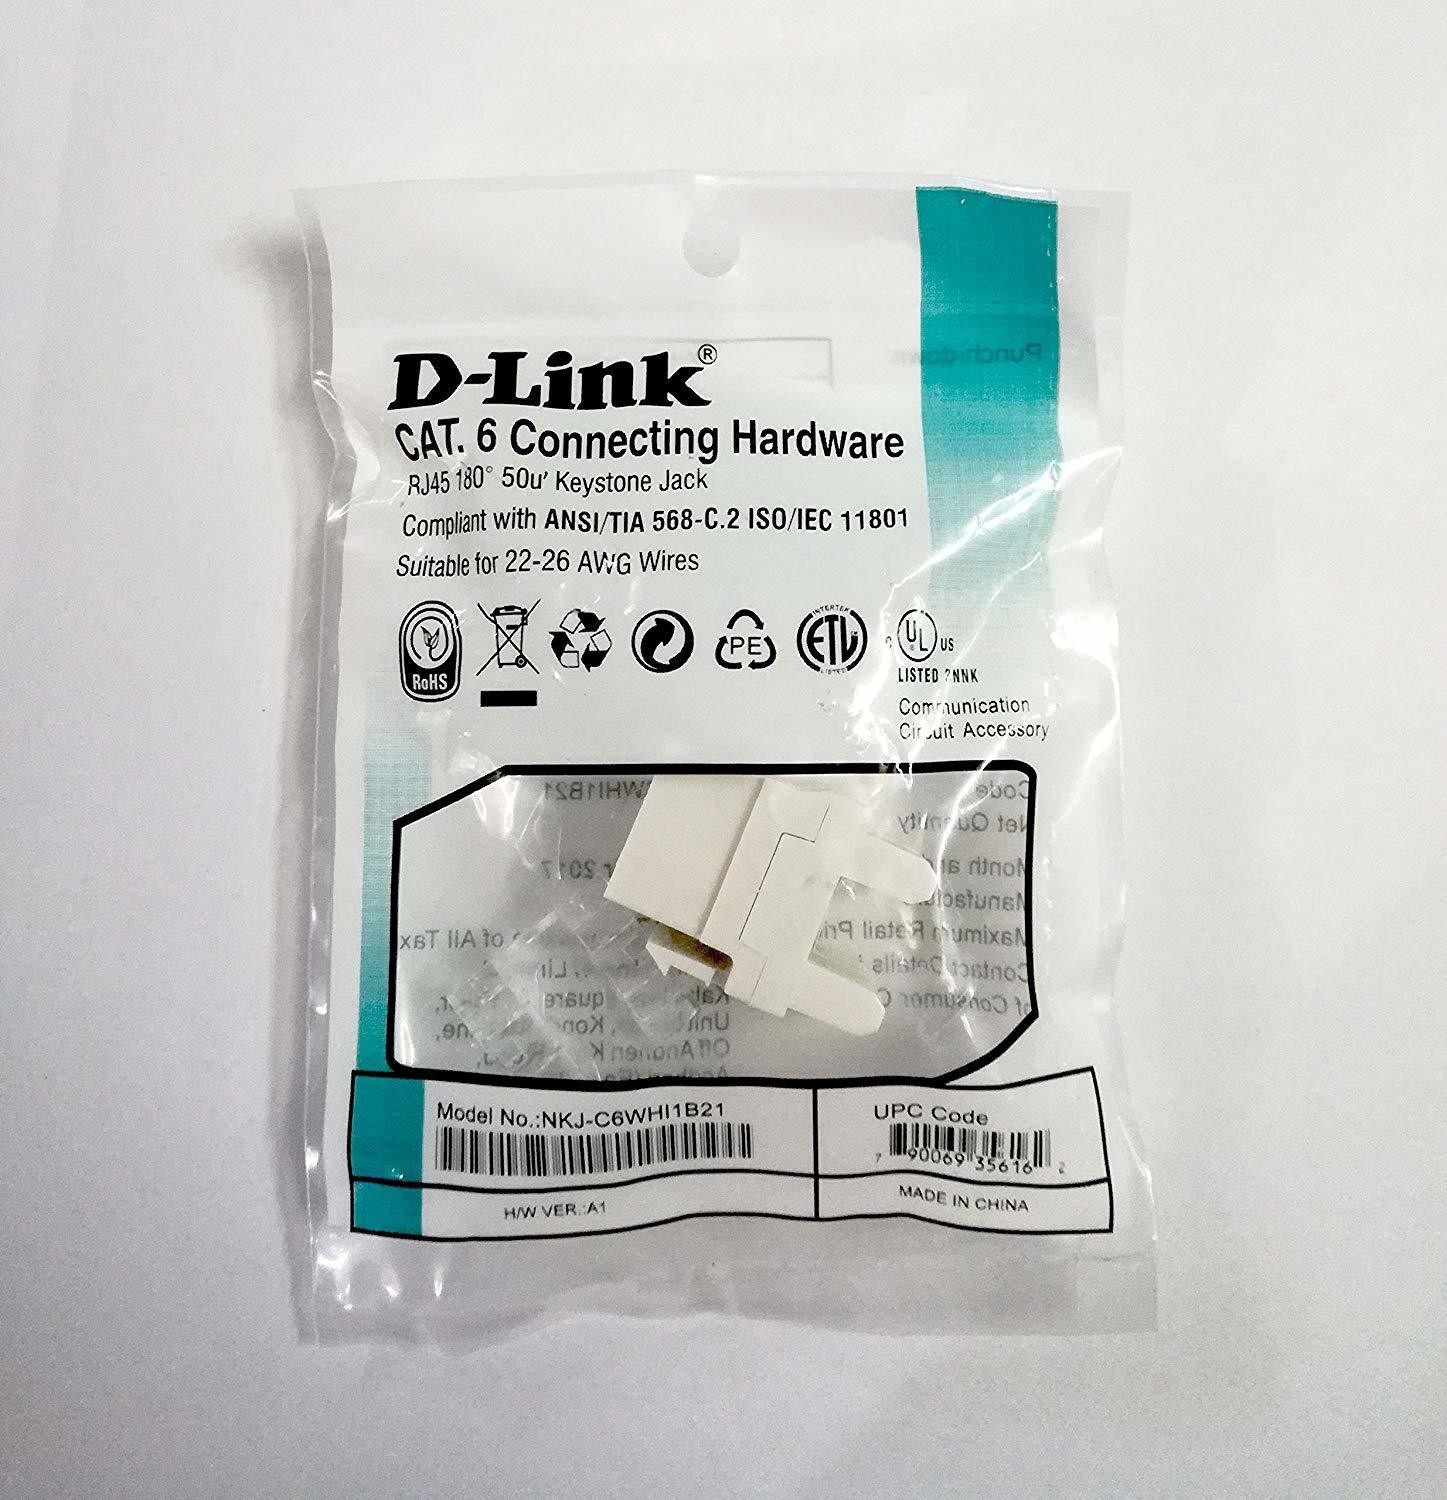 D Link Cat-6, I/O Connecting Hardware - Rs.110